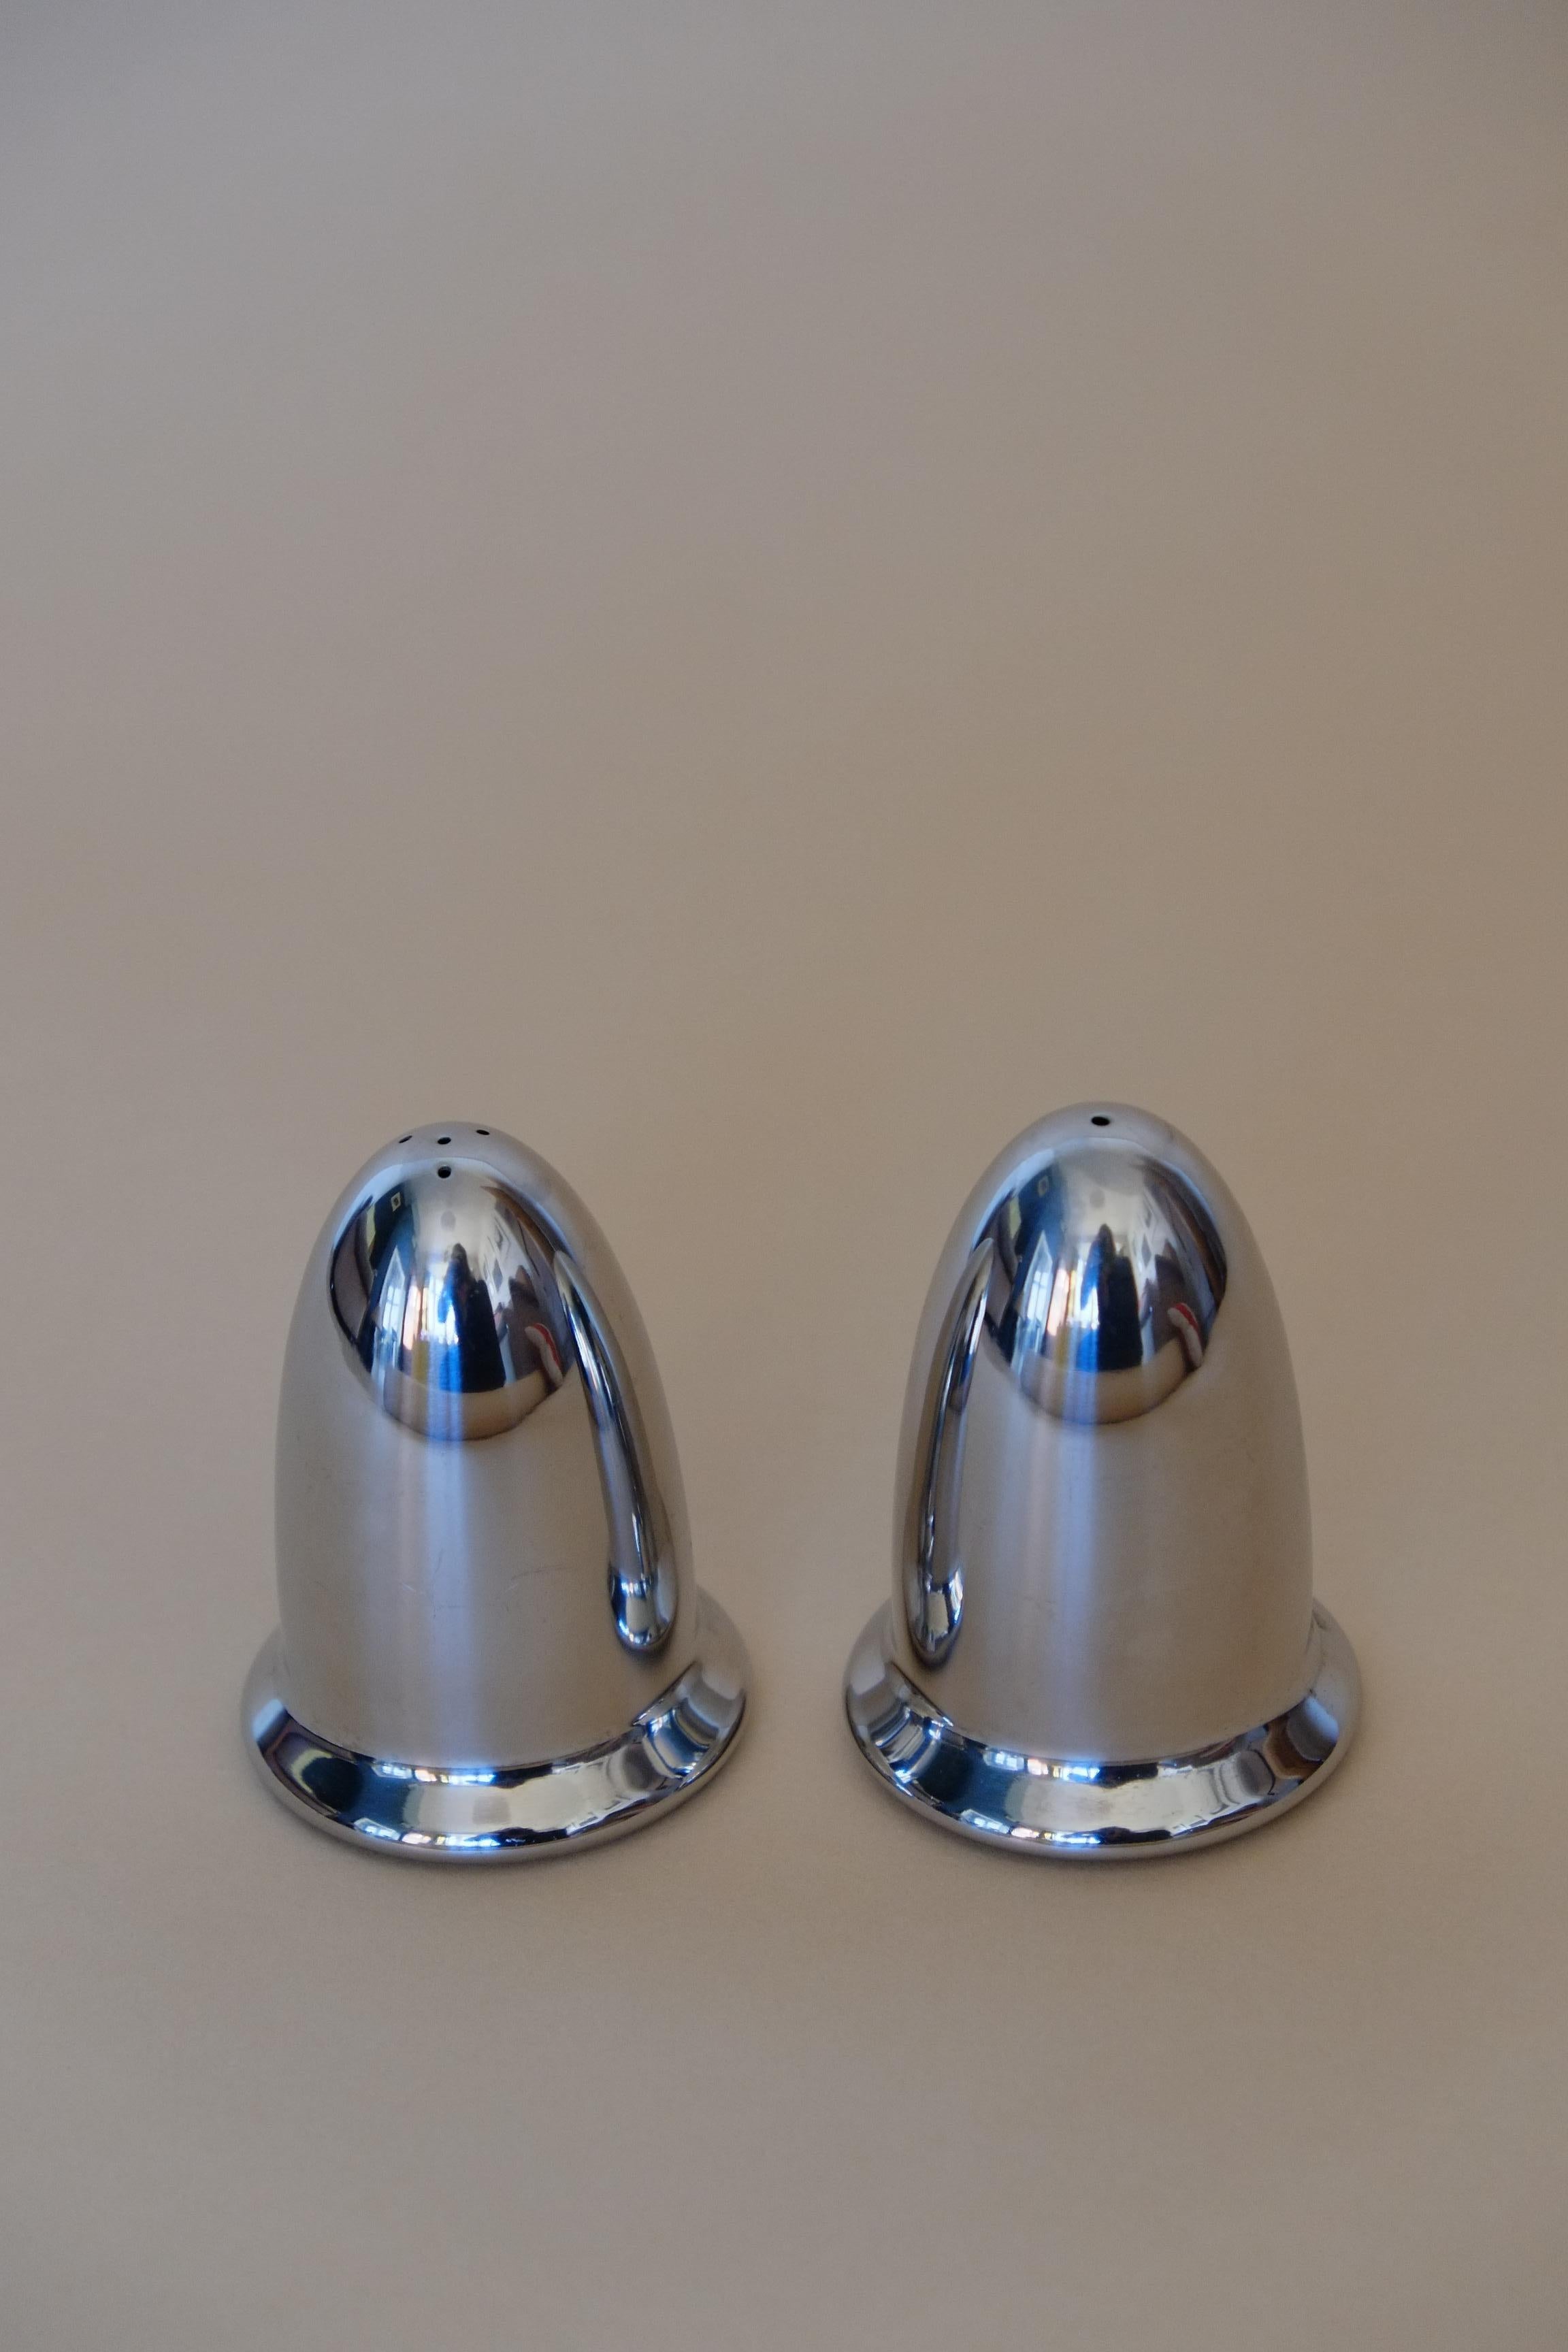 English Mid Century 1960's Stainless Steel Bullet Salt and Pepper Shakers For Sale